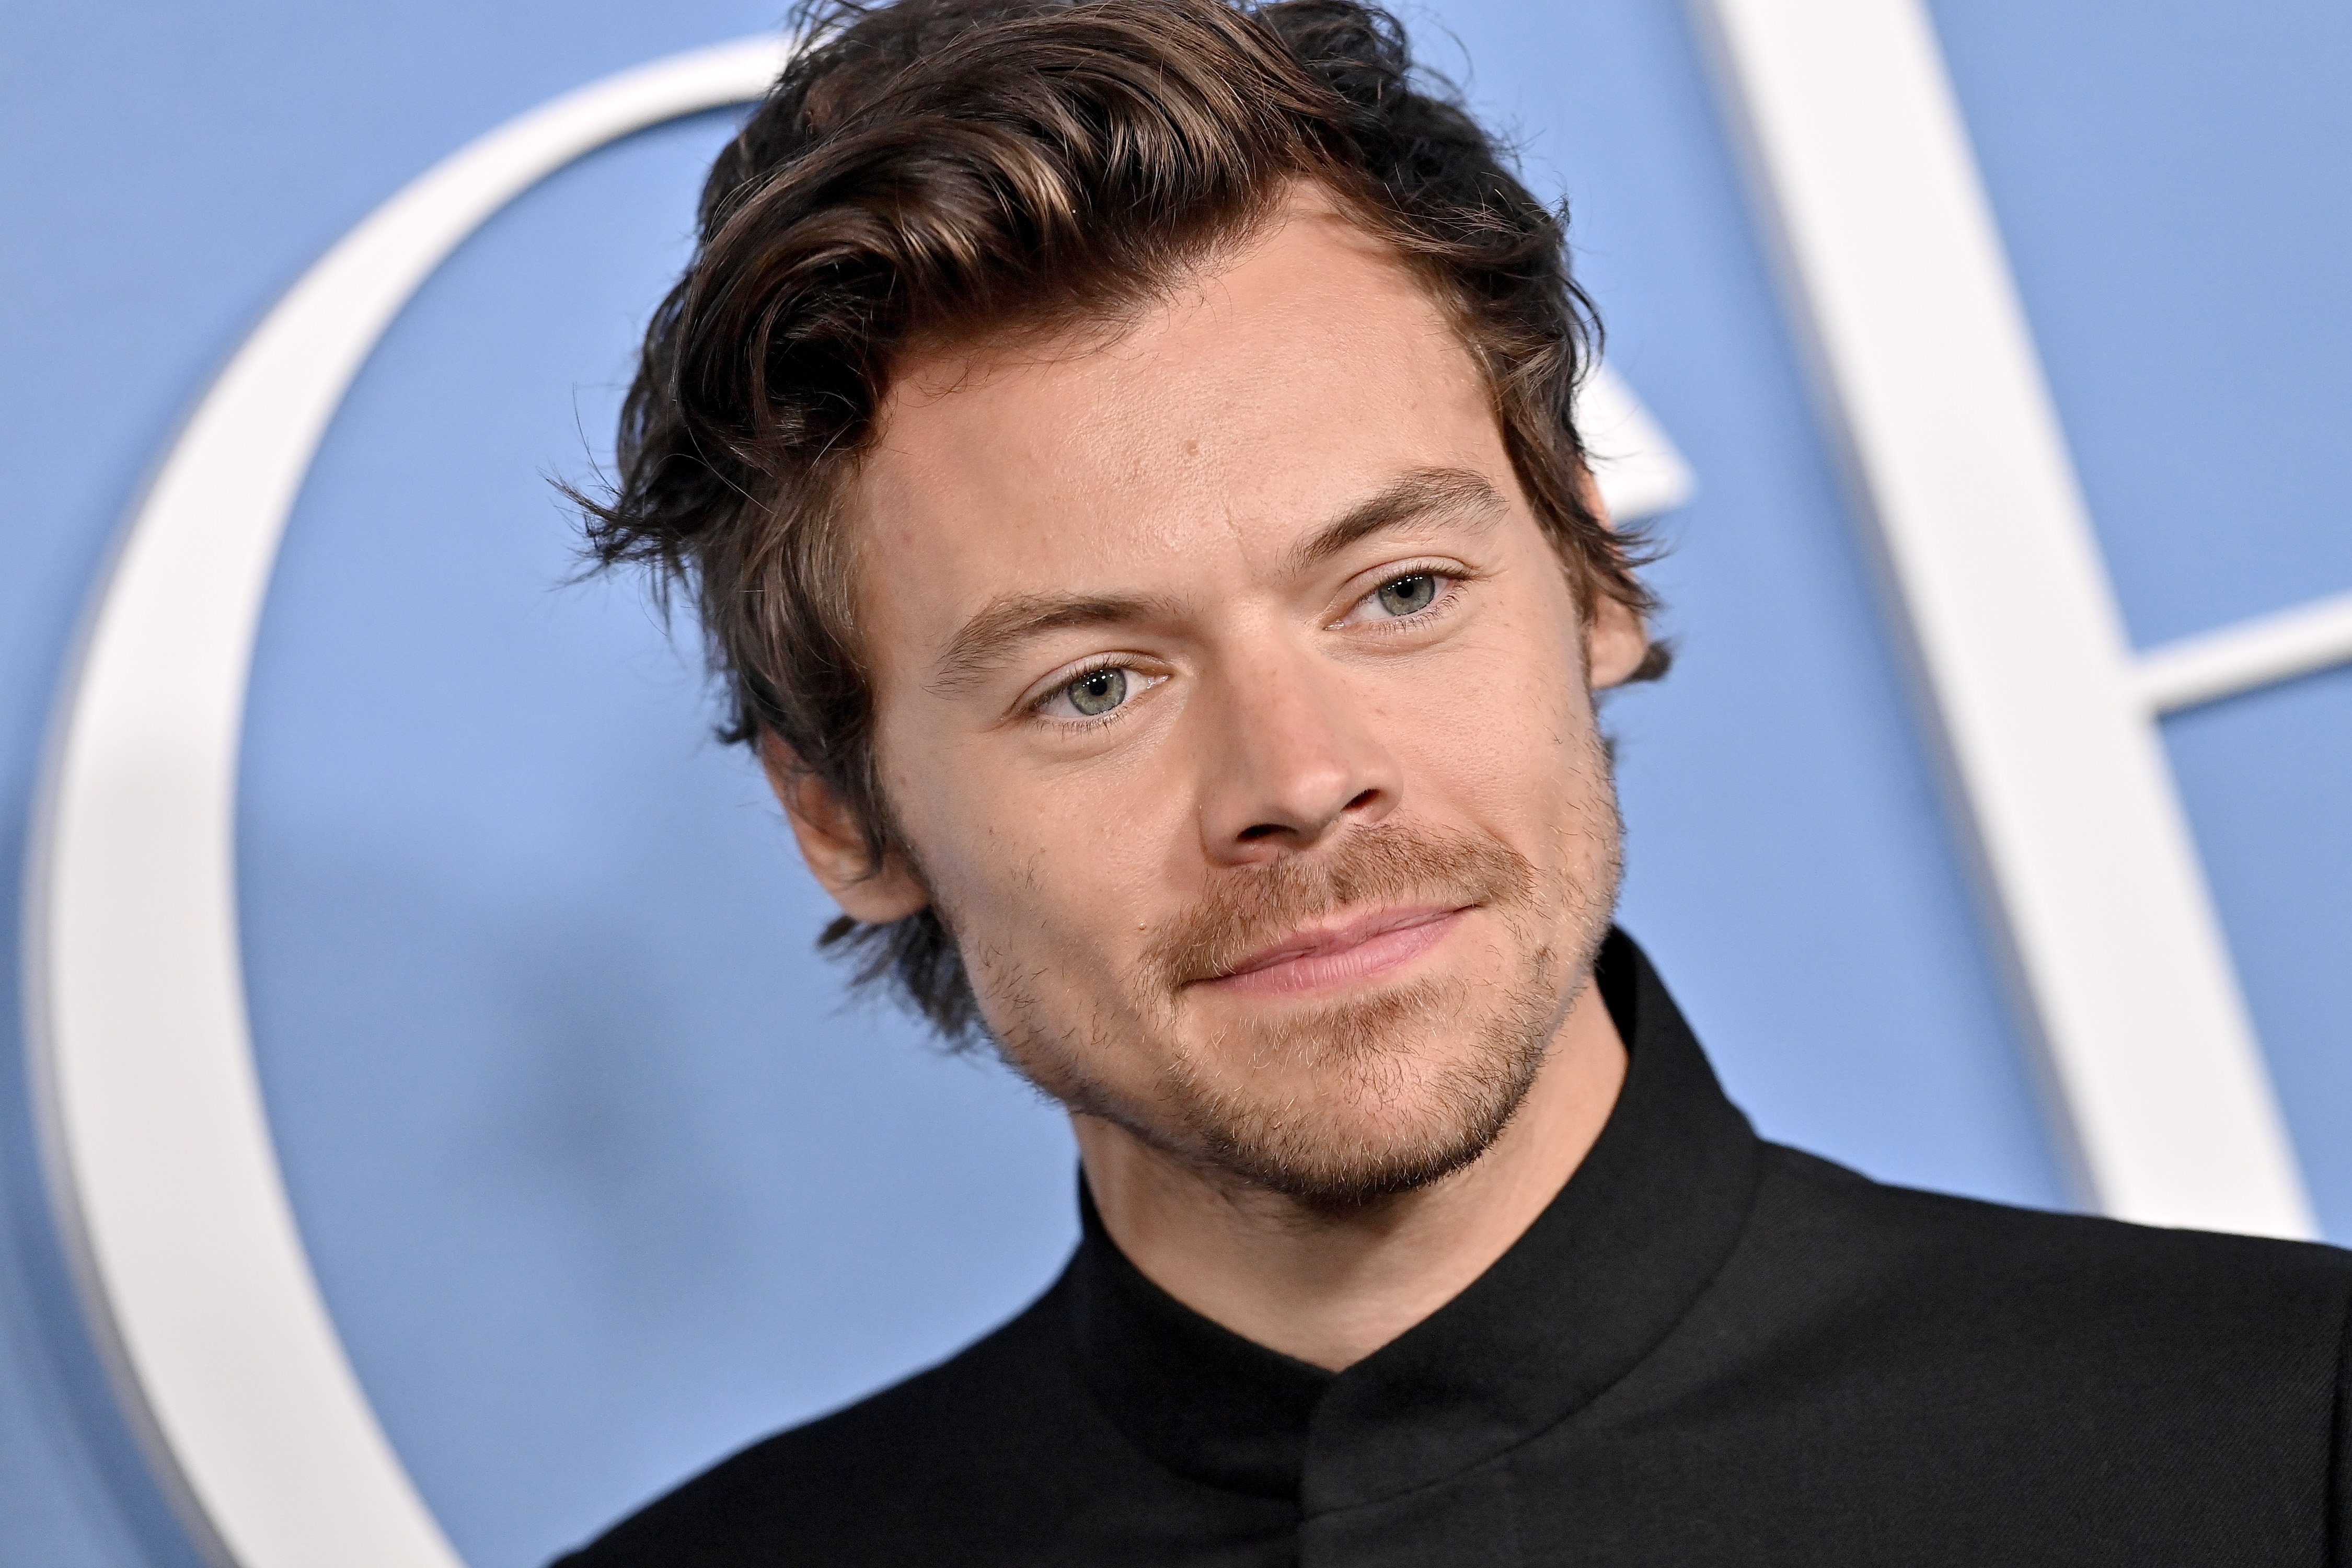 Harry Styles at the Los Angeles Premiere of "My Policeman" in November 2022. | Source: Getty Images